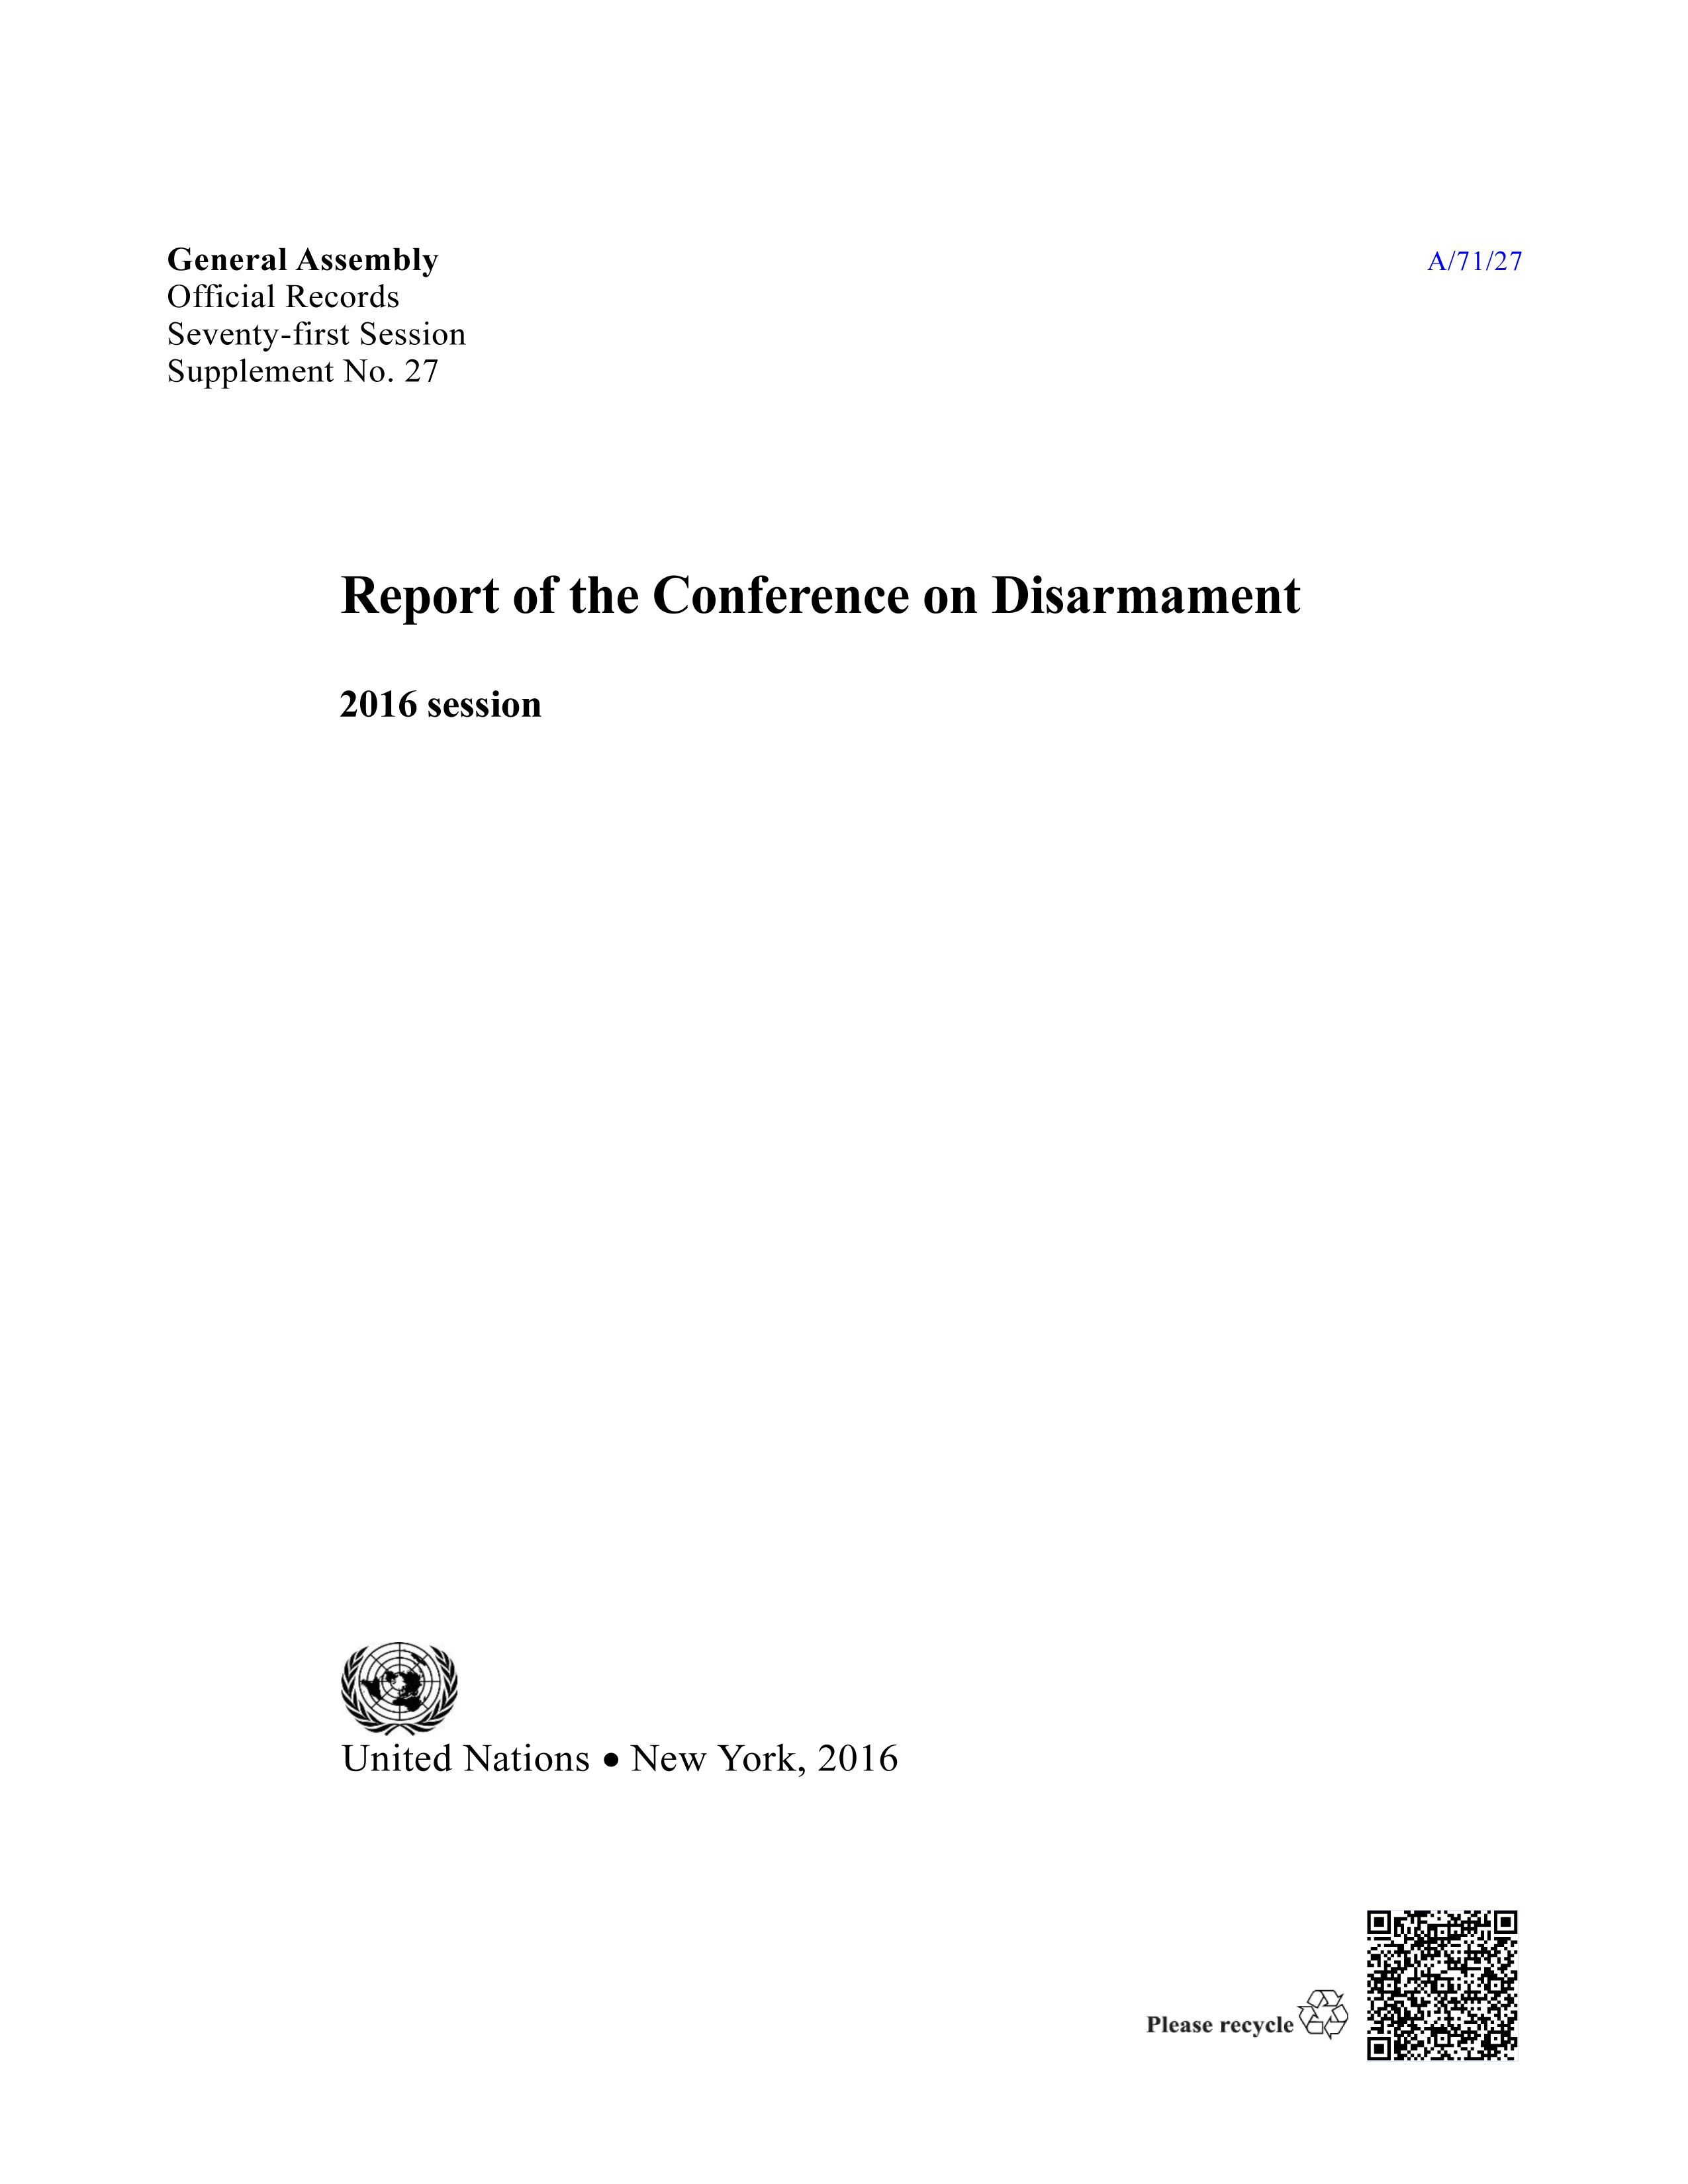 image of Report of the Conference on Disarmament: 2016 Session